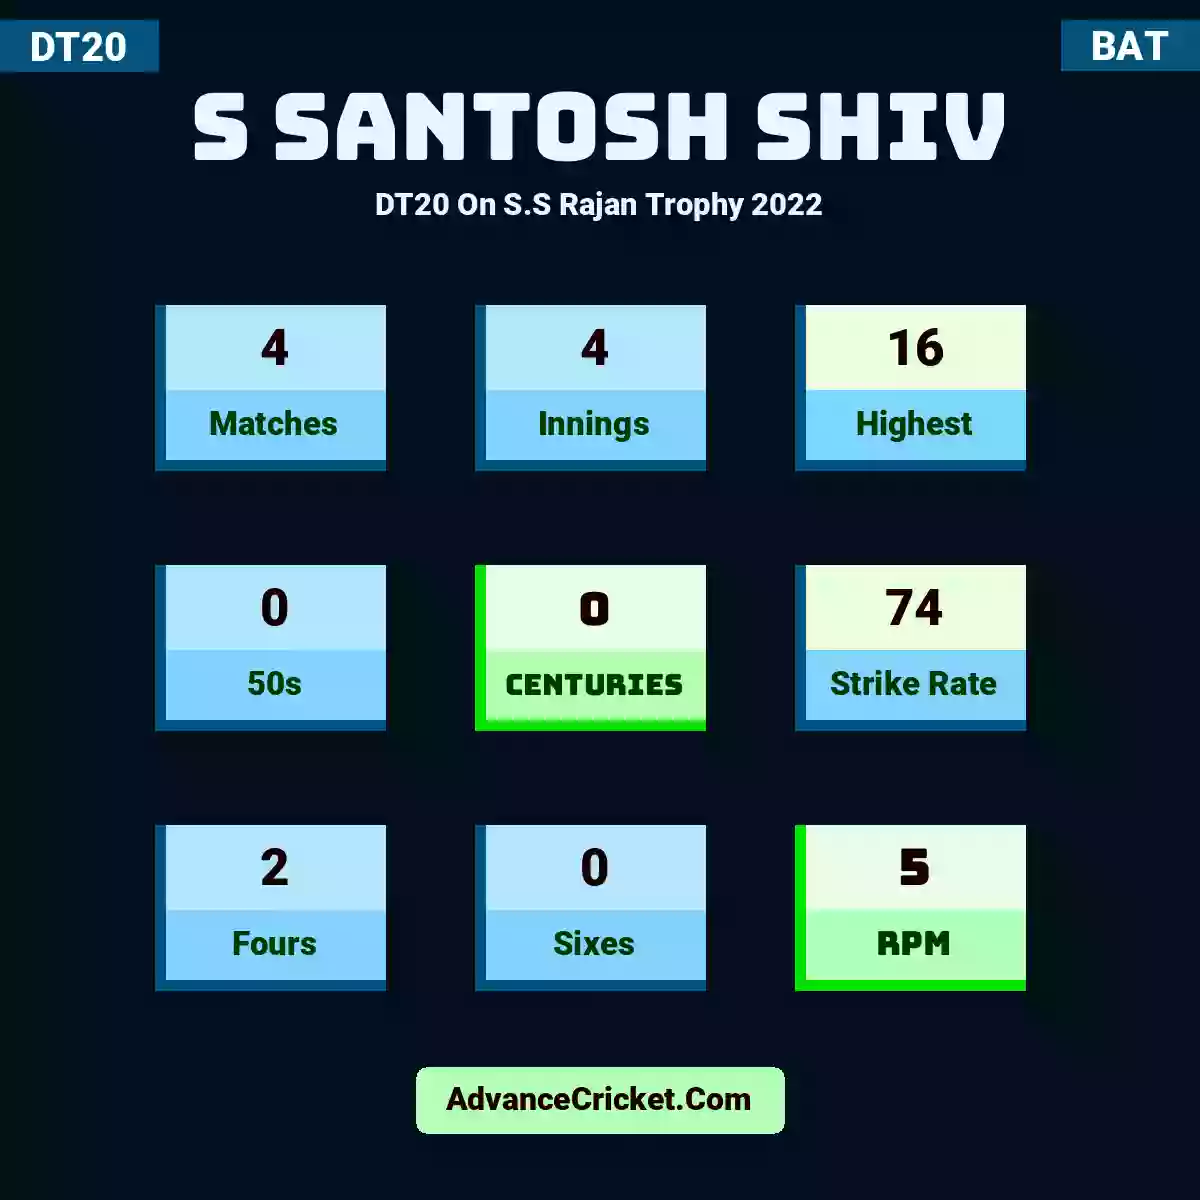 S Santosh Shiv DT20  On S.S Rajan Trophy 2022, S Santosh Shiv played 4 matches, scored 16 runs as highest, 0 half-centuries, and 0 centuries, with a strike rate of 74. S.Santosh.Shiv hit 2 fours and 0 sixes, with an RPM of 5.